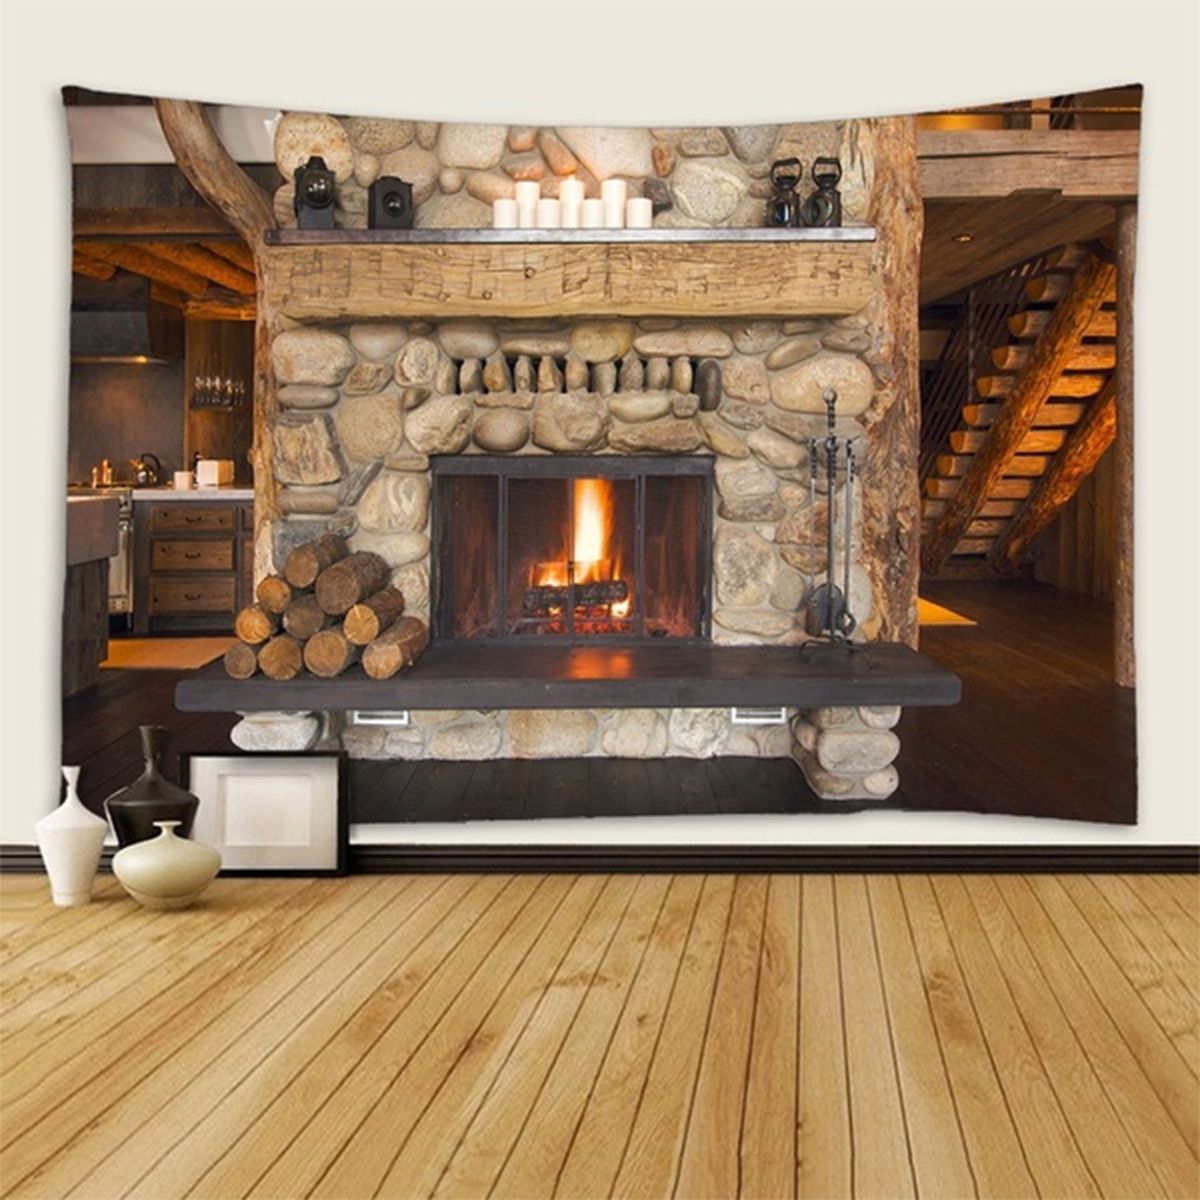 Vivid-Fireplace-Pattern-Tapestry-New-Wall-Hanging-Psychedlic-Tapestries-Decorations-1634220